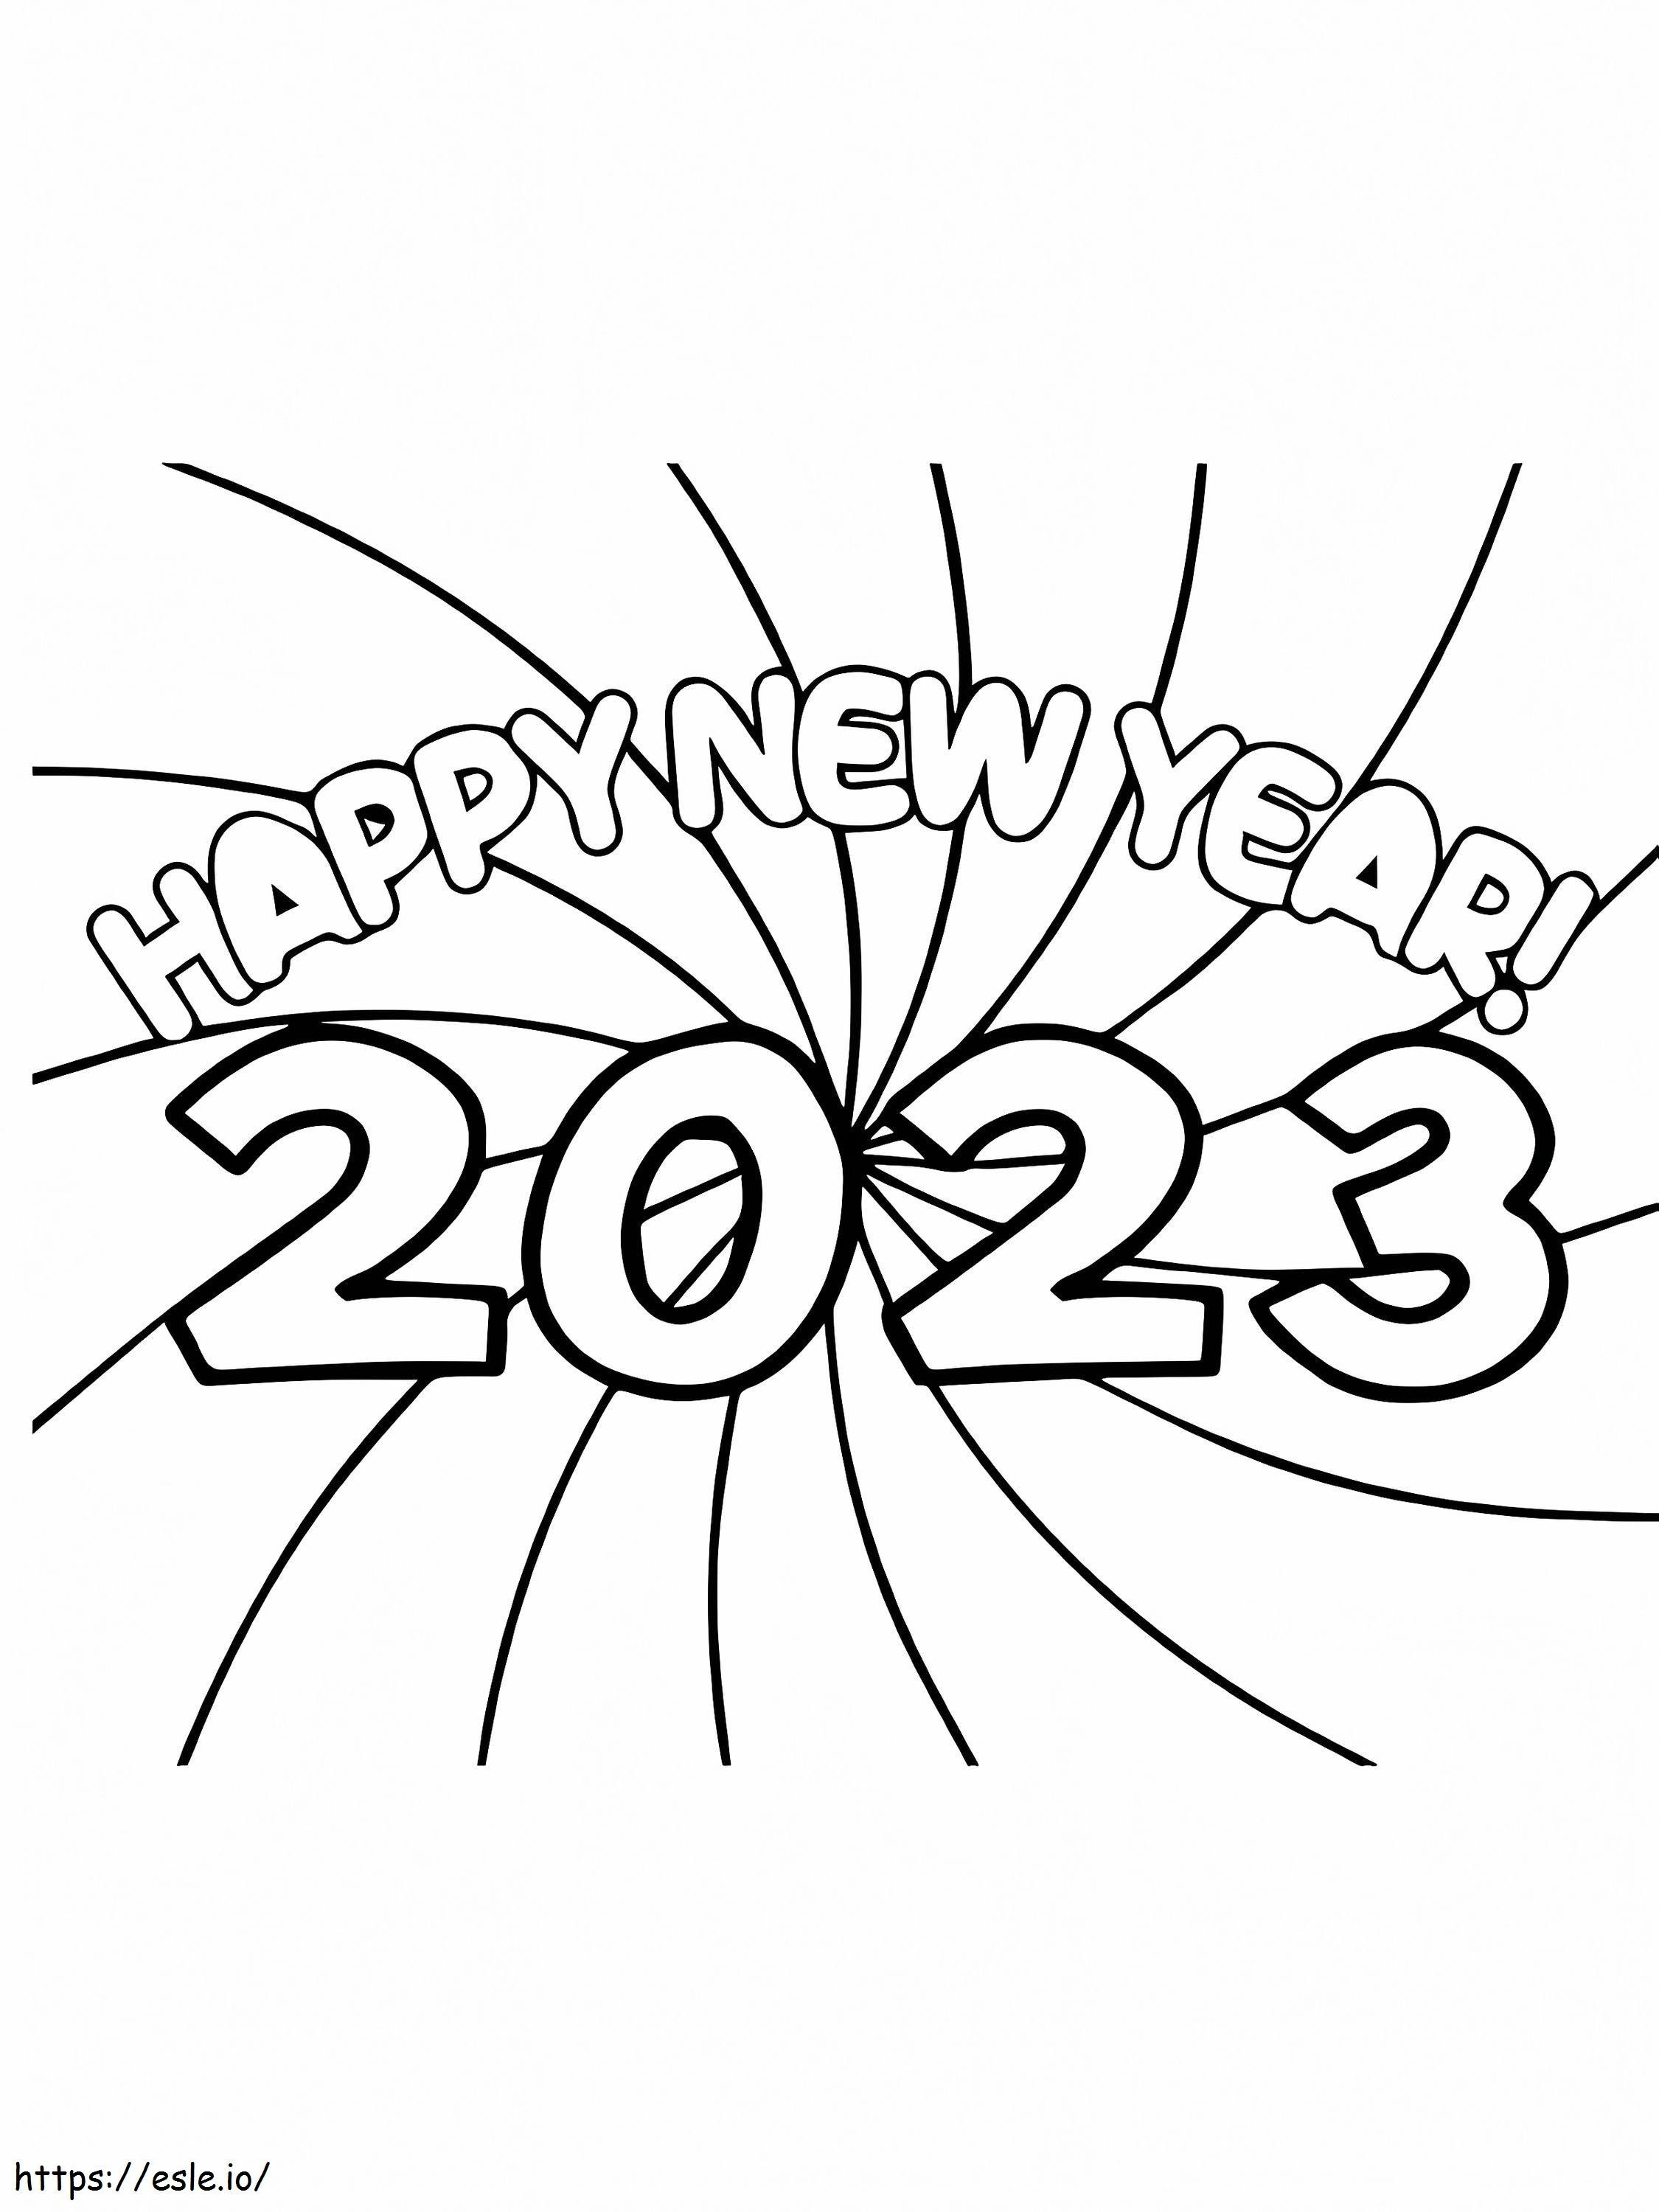 Happy New Year 2023 Coloring Page coloring page